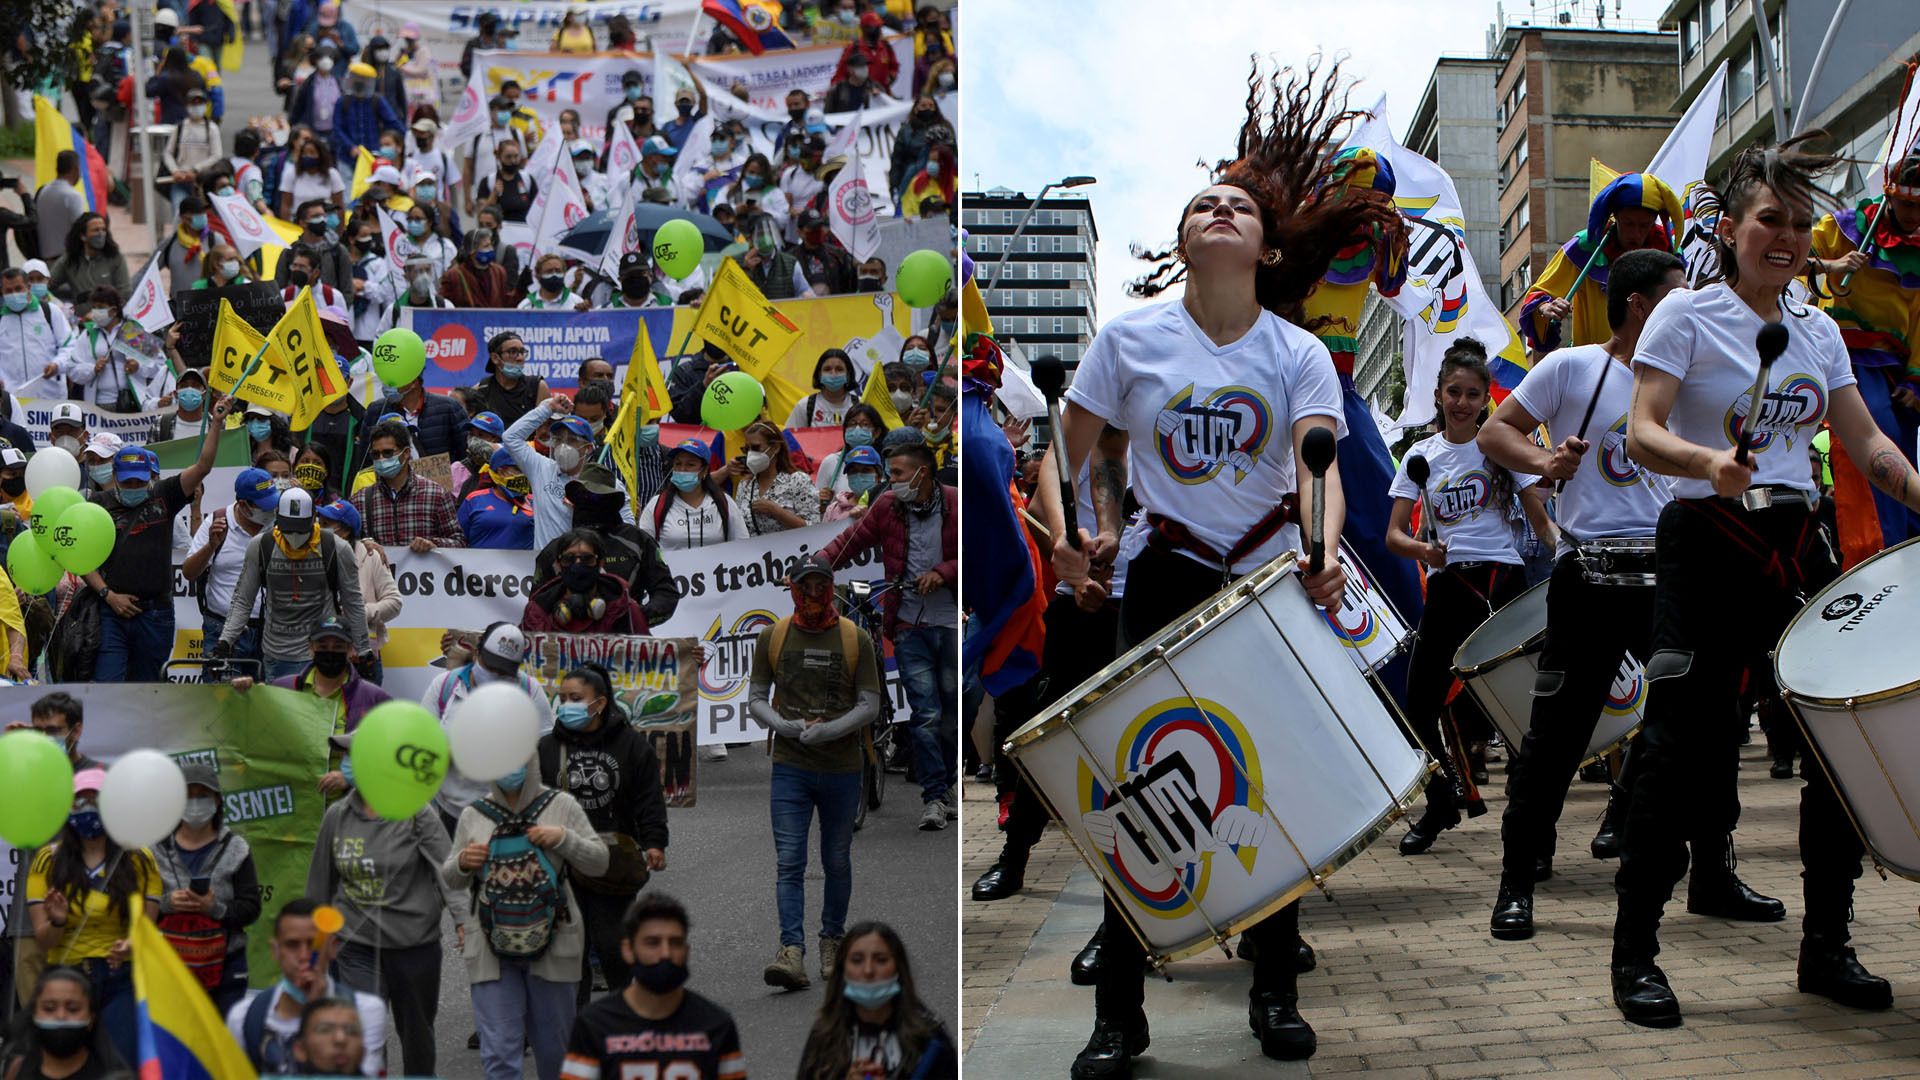 A split screen with colorful protesters  on the left and a woman drumming on the right.